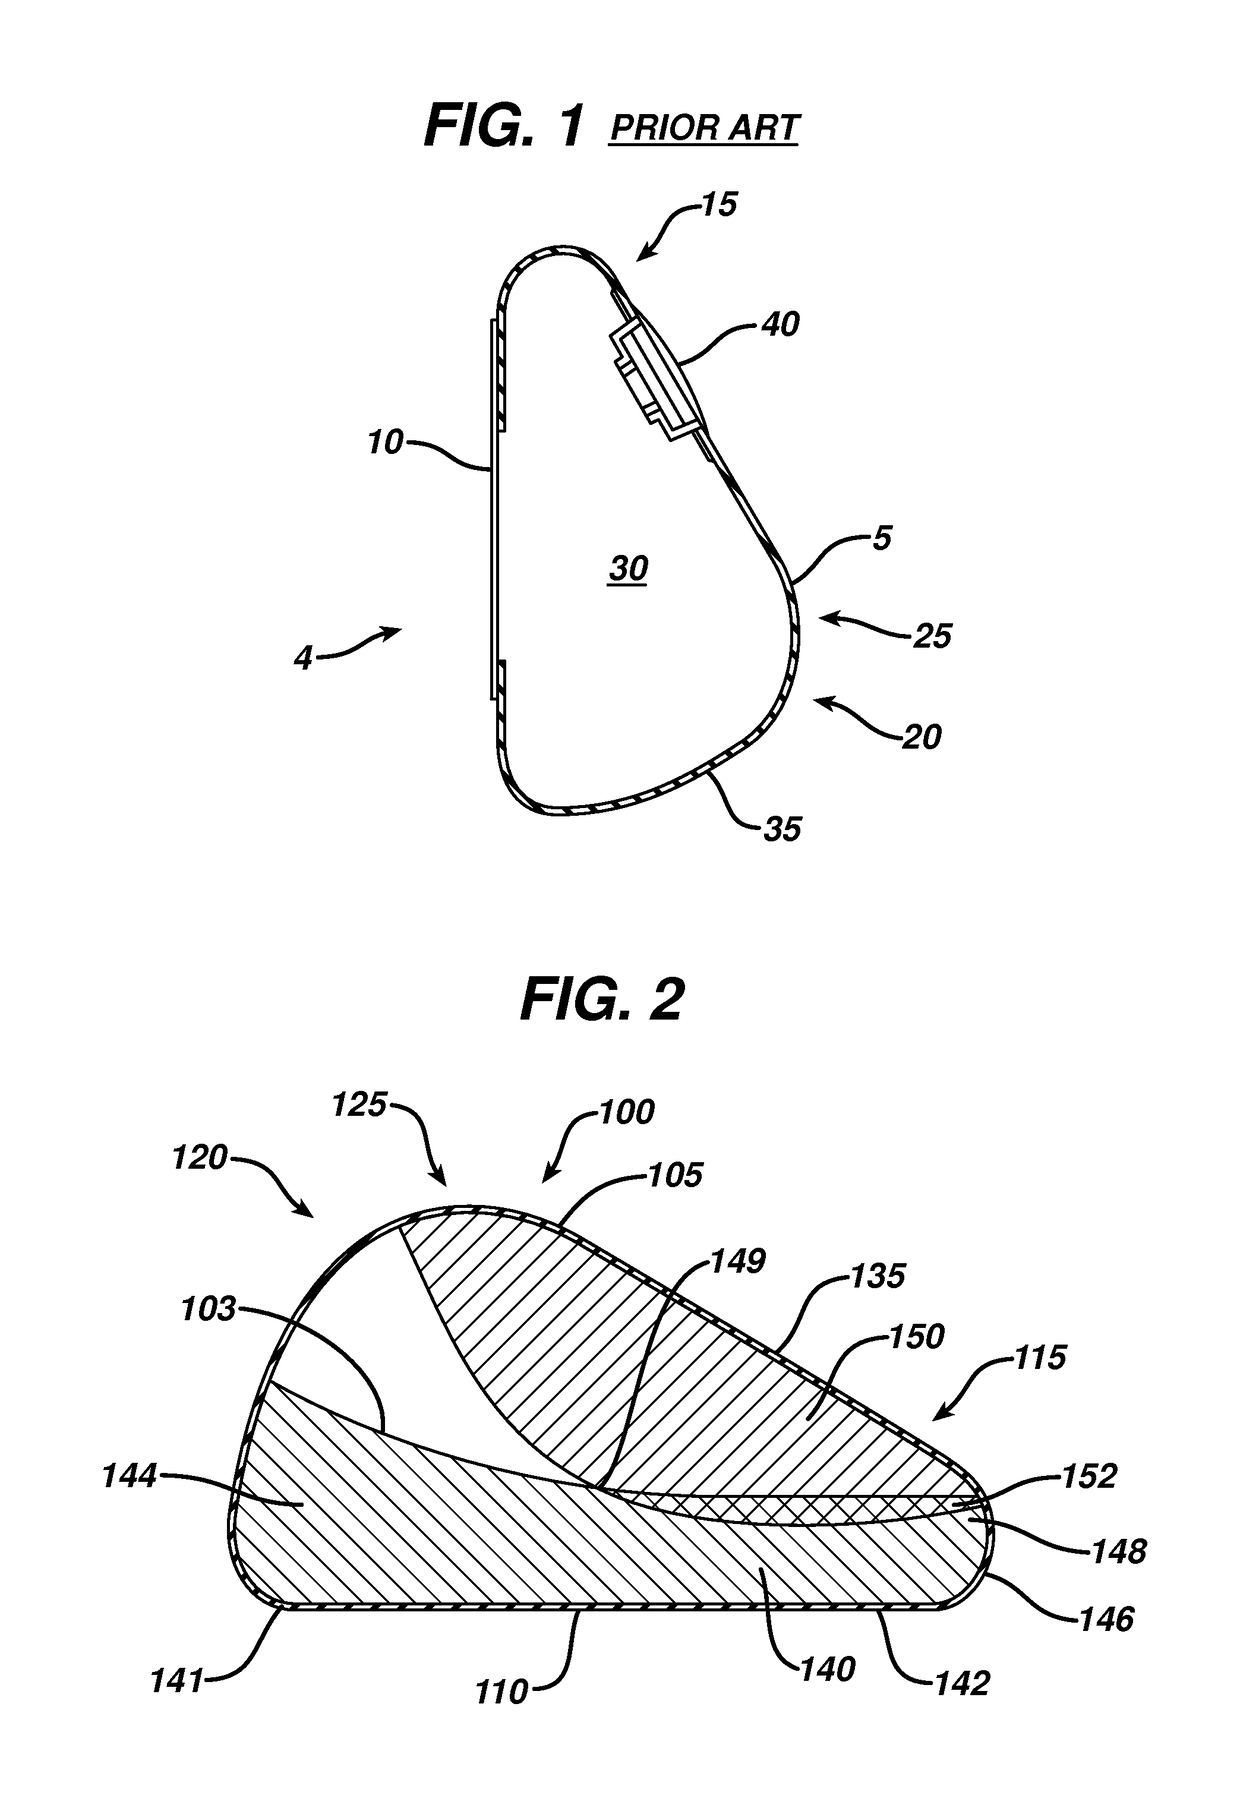 Directional tissue expander